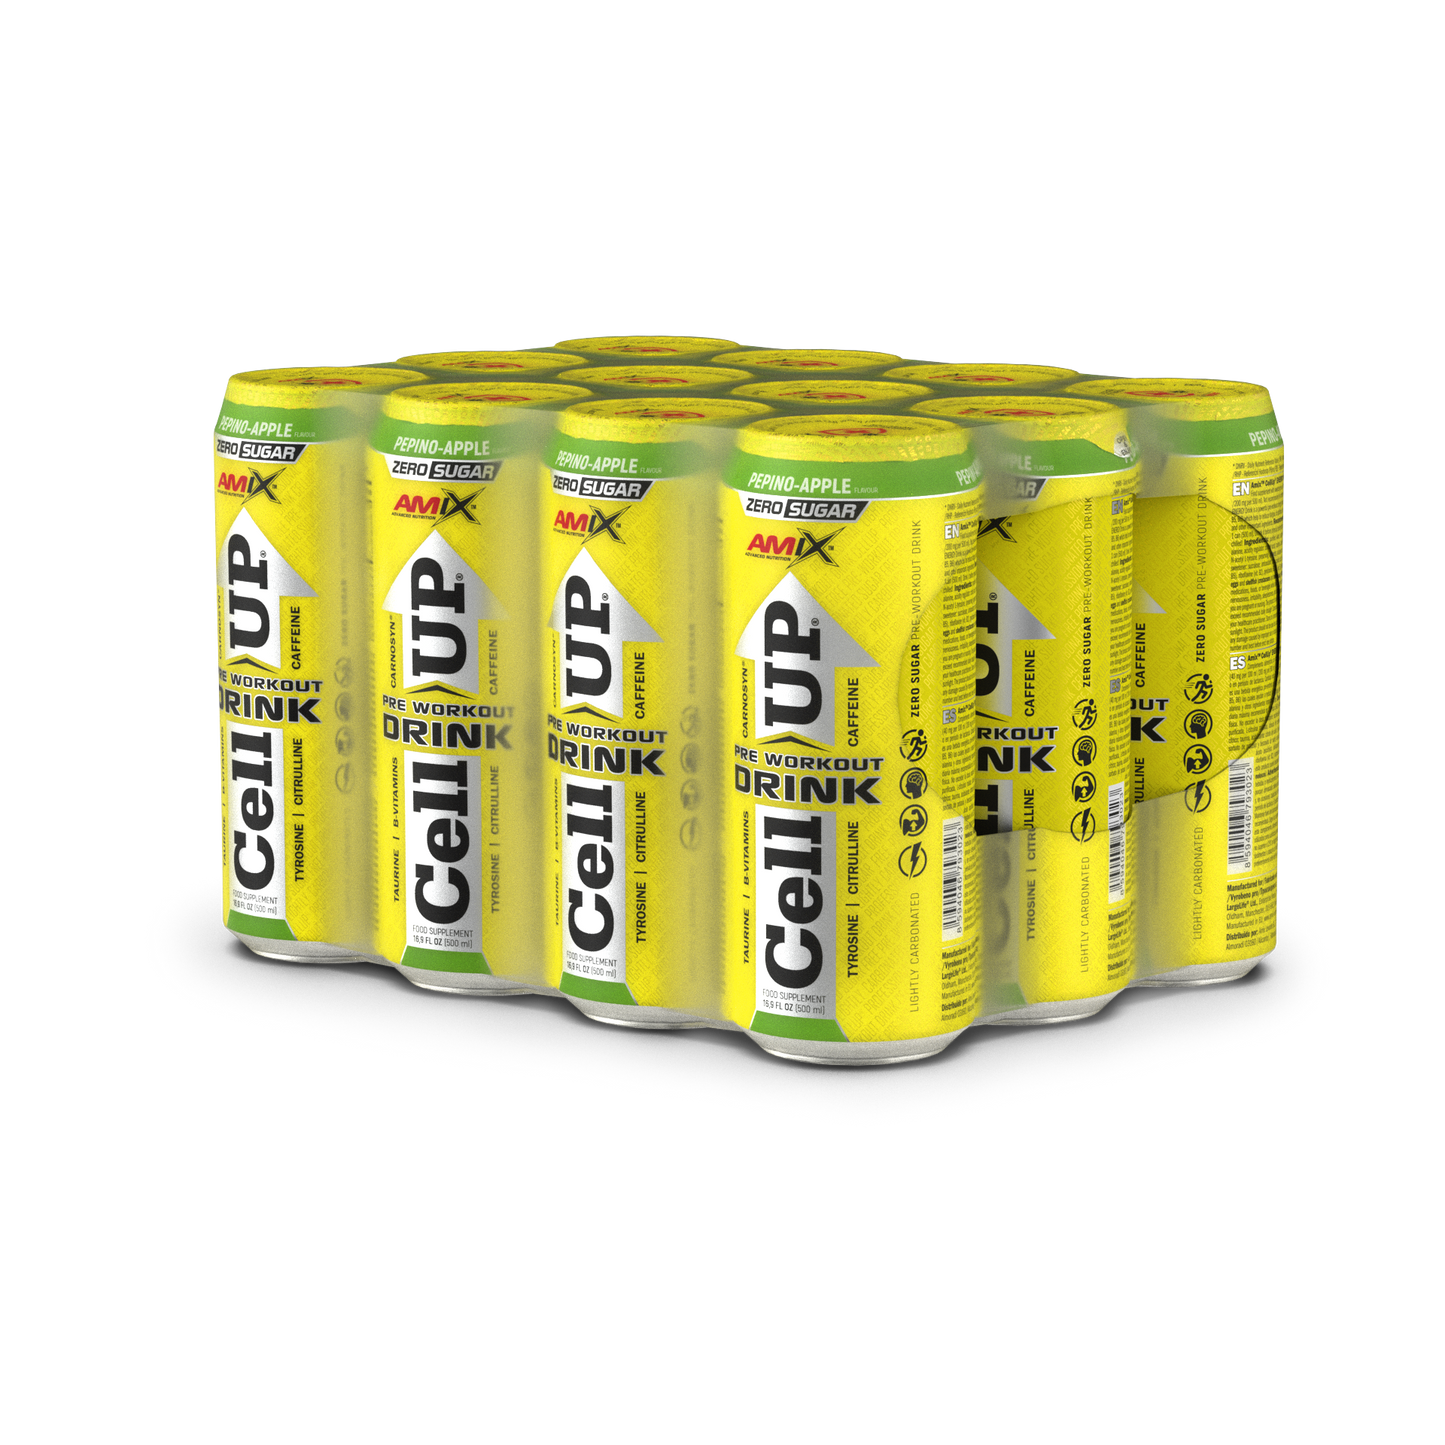 CELLUP FUNCTIONAL DRINK 500 ML